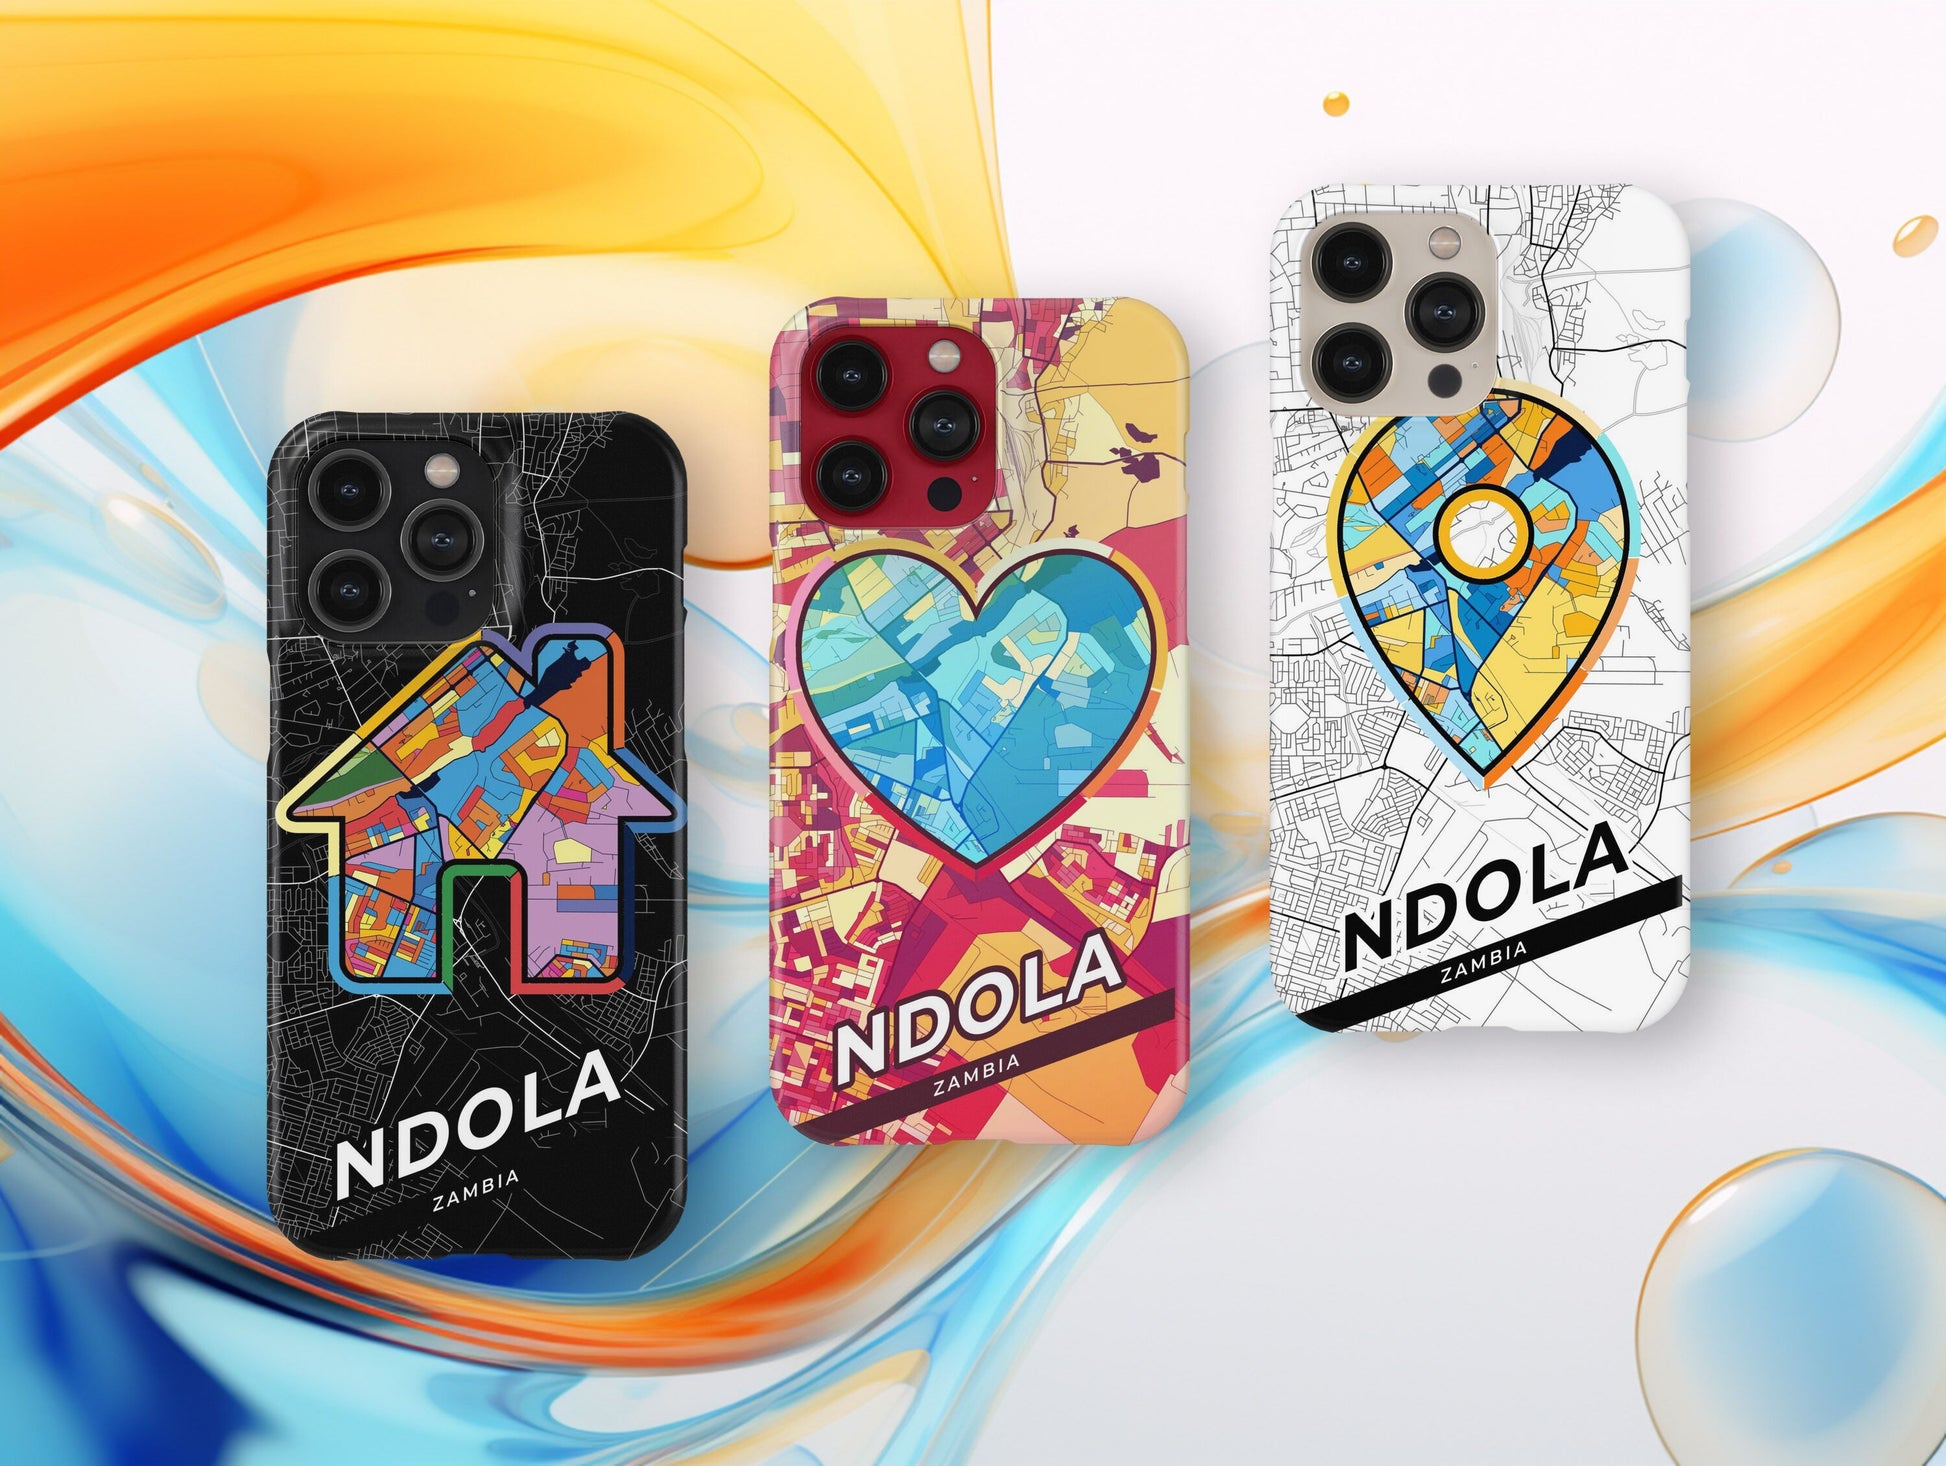 Ndola Zambia slim phone case with colorful icon. Birthday, wedding or housewarming gift. Couple match cases.